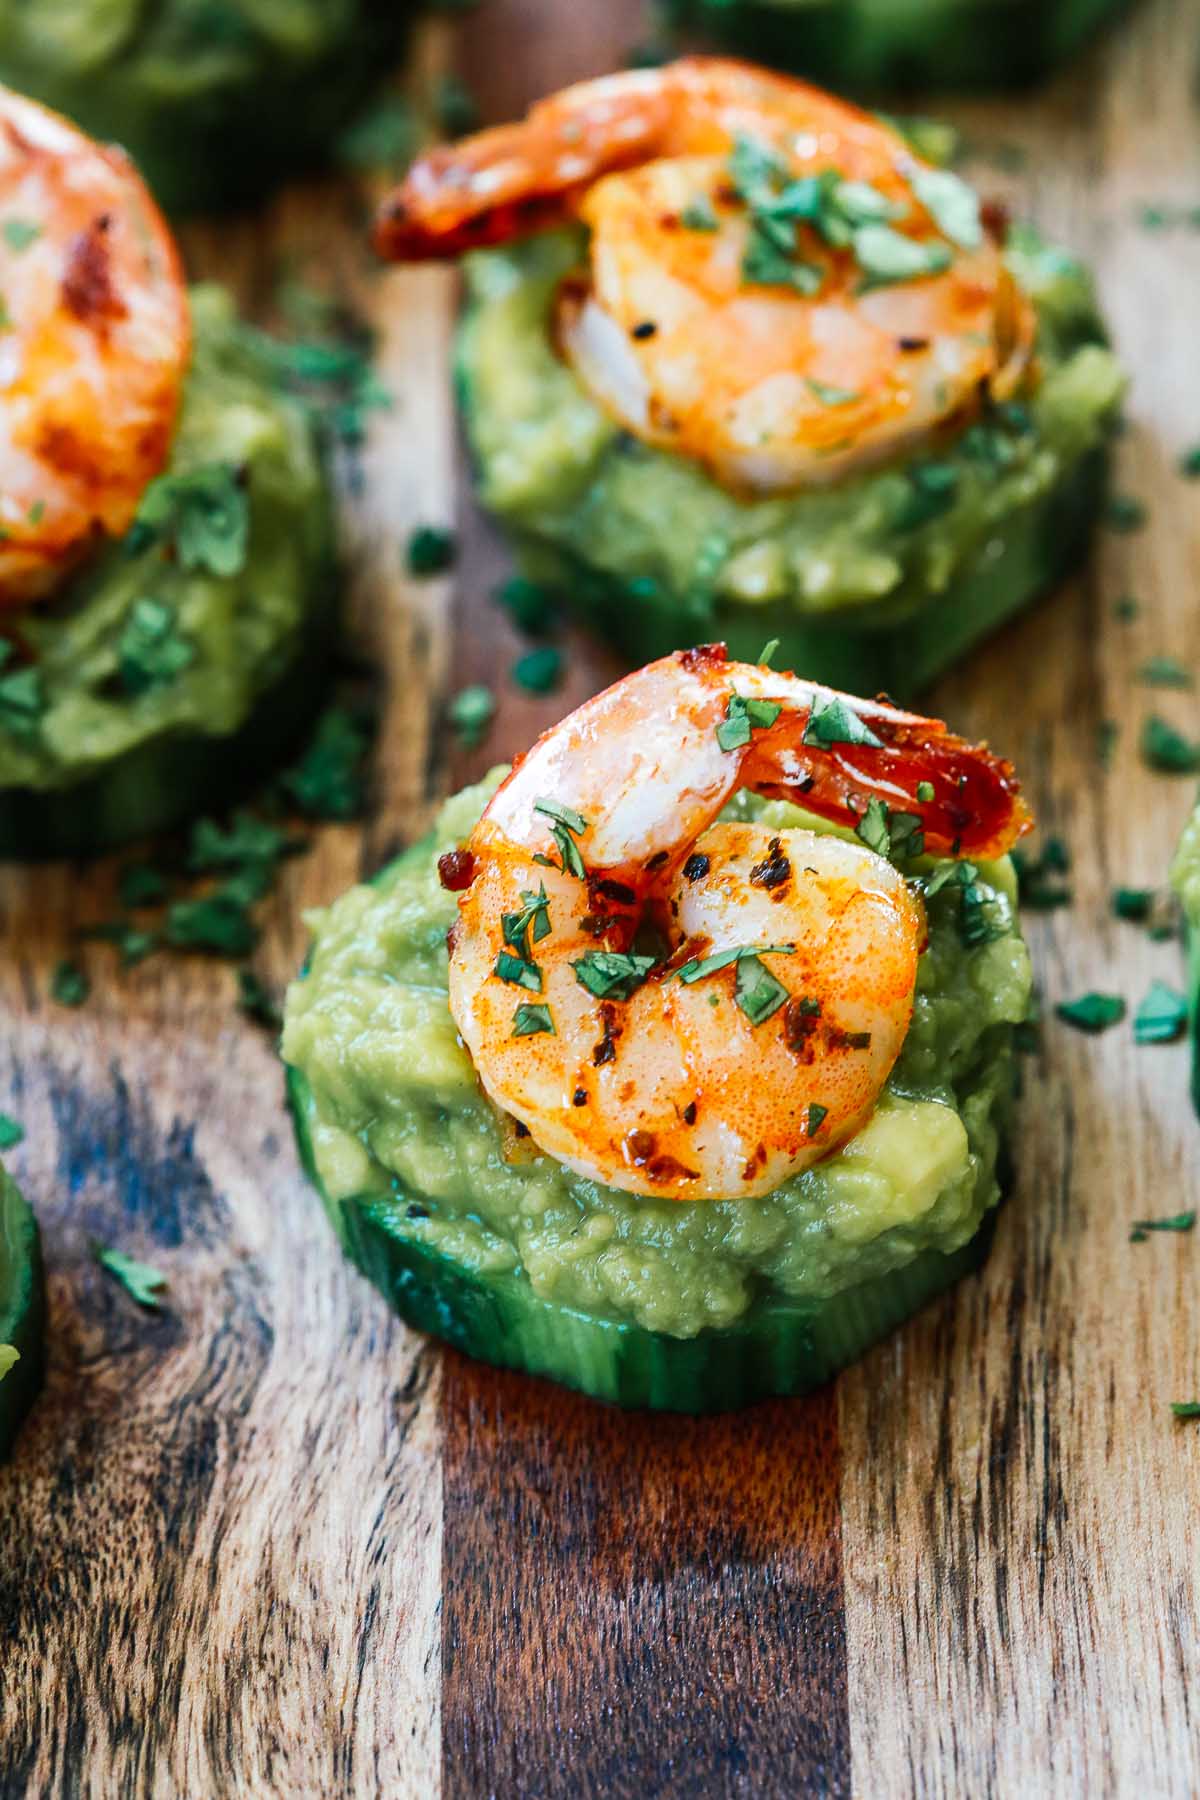 Slices of cucumber topped with guacamole and shrimp